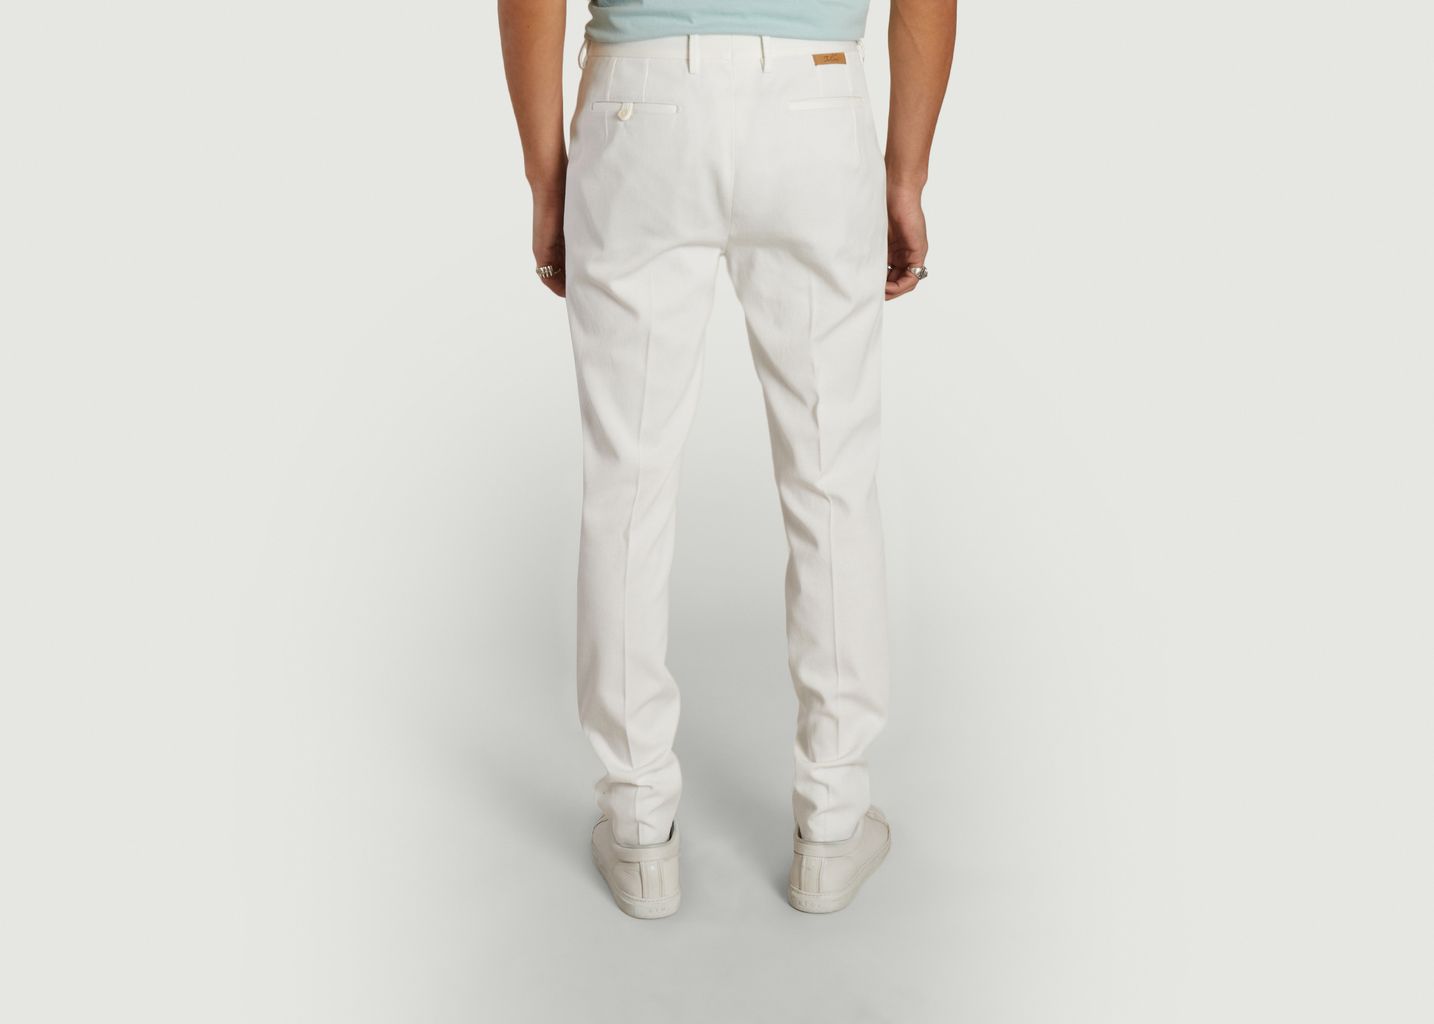 Chino-Hose aus Baumwolle - The Chino Revived